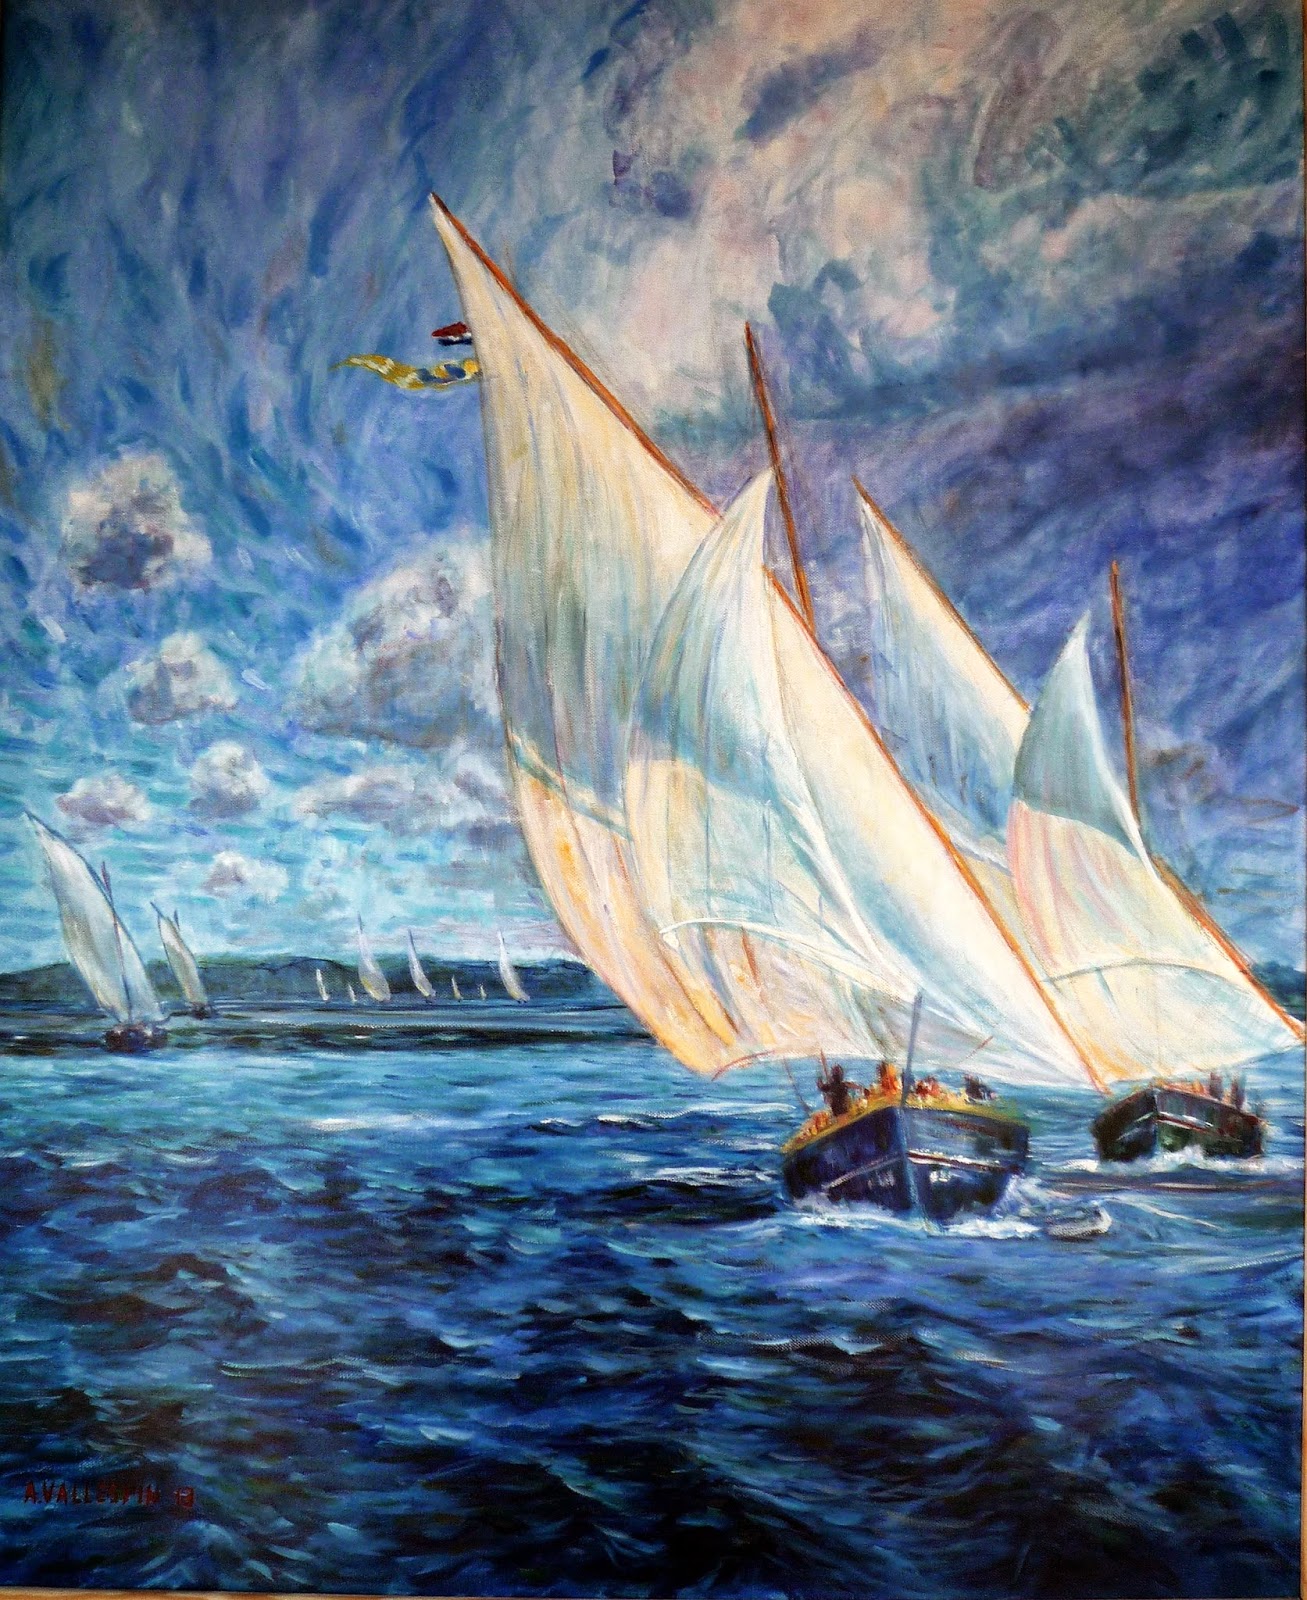 Oil on canvas of two lateen sail boats sailing in blue sea